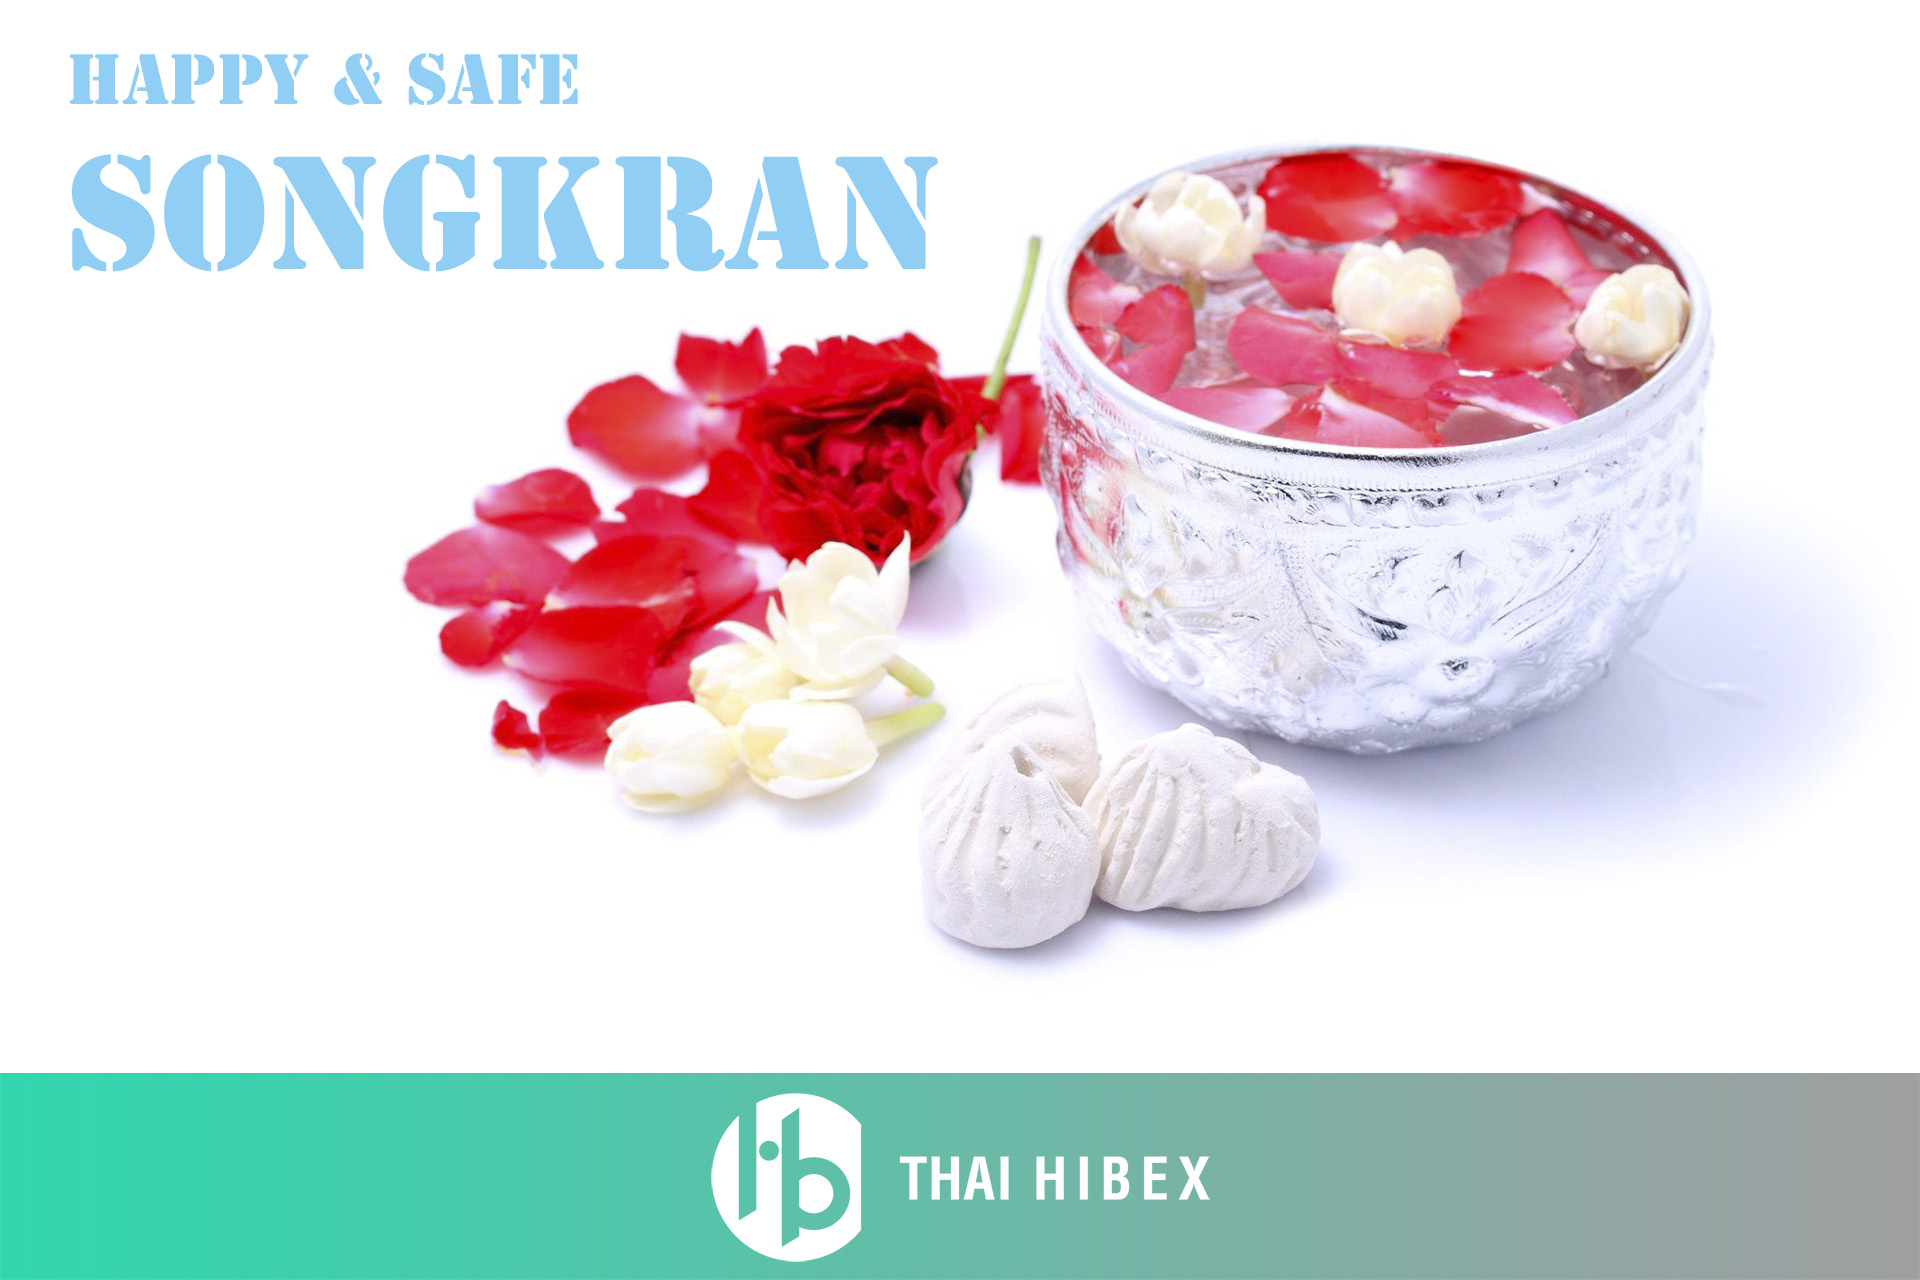 Wishing you a safe and healthy Songkran Festival 2021